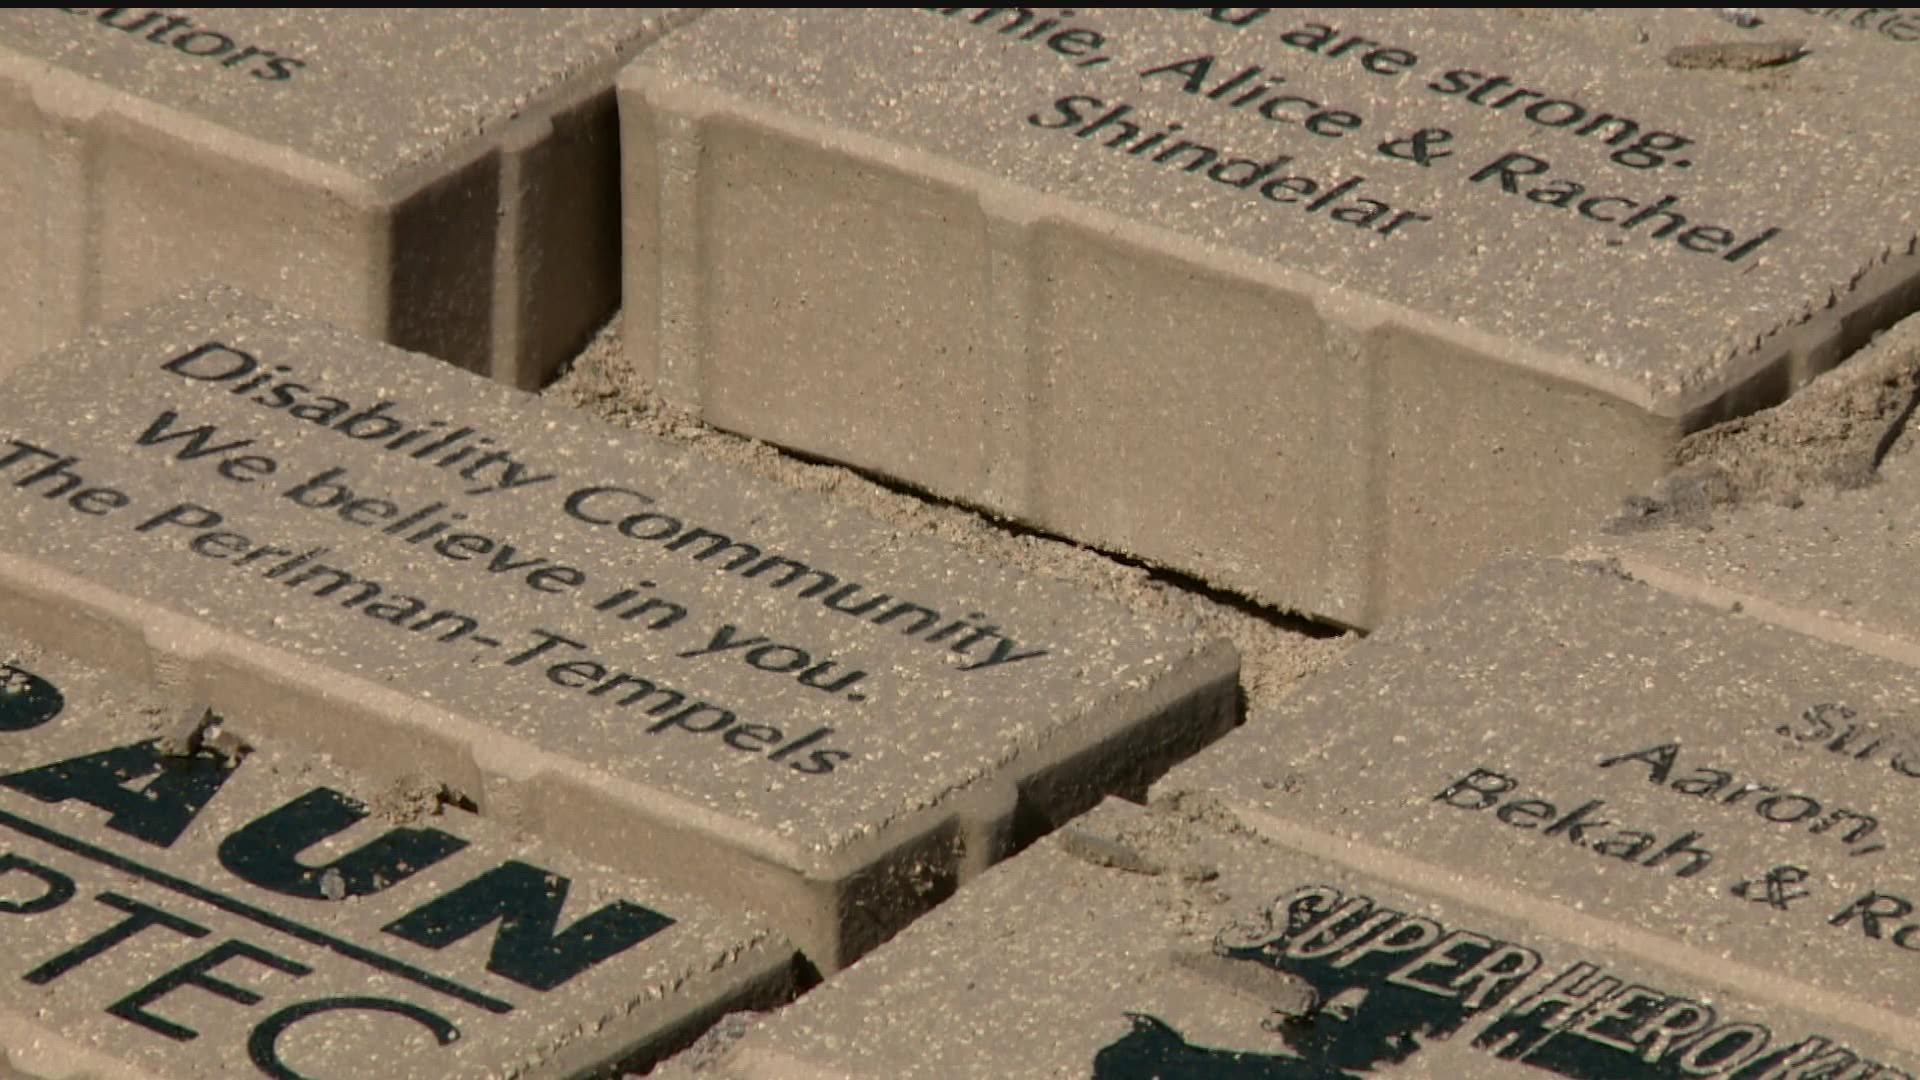 The Survivors Memorial, located in Boom Island Park in Minneapolis, has significant damage to its mosaics, donor recognition bricks and granite panels.